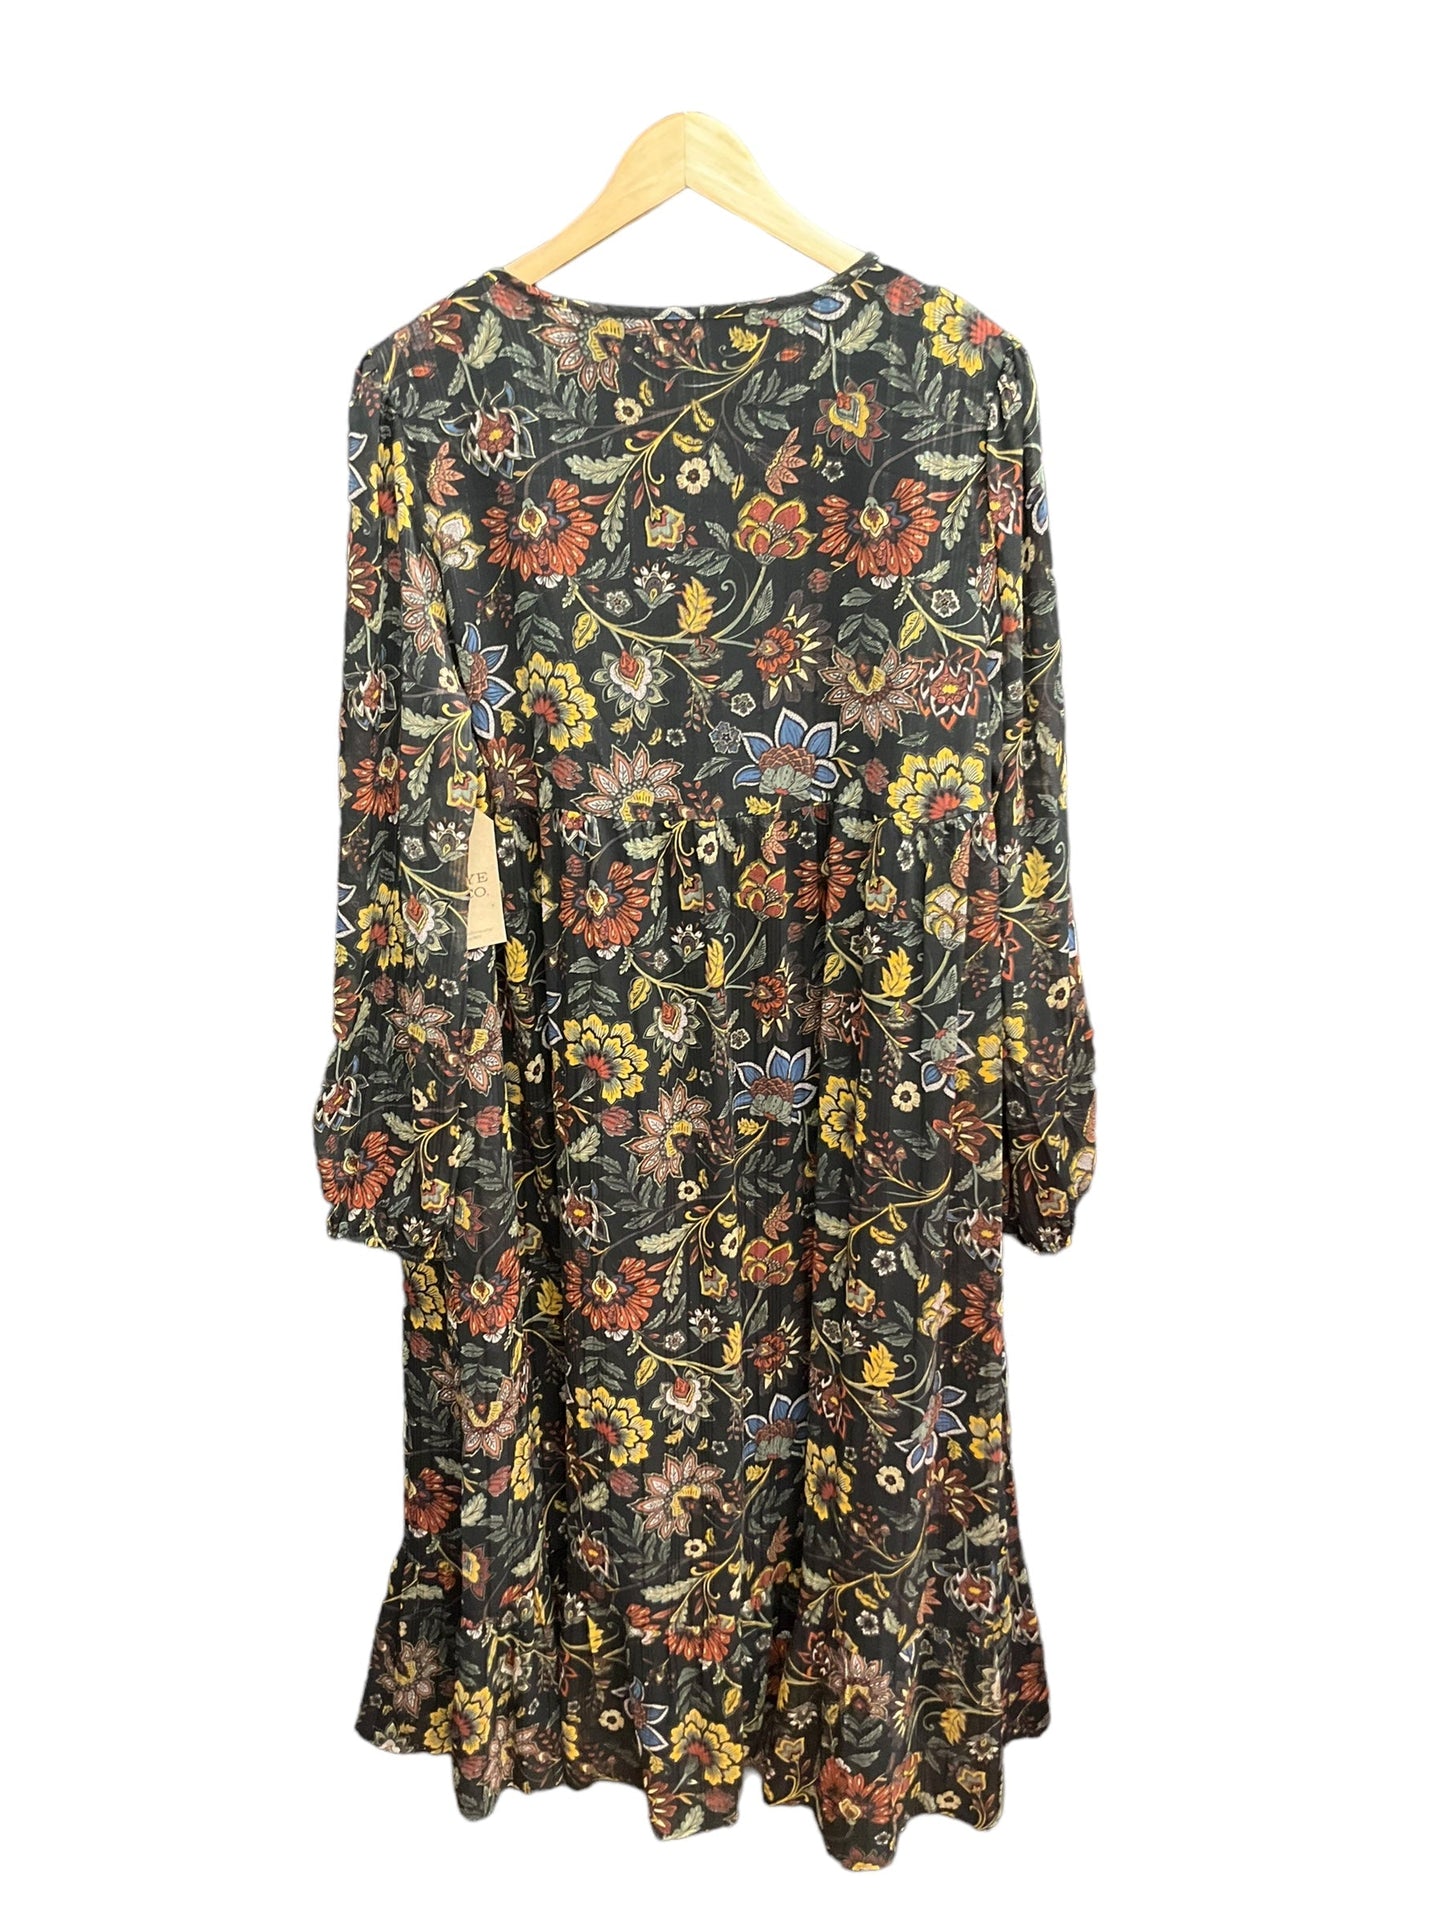 Floral Print Dress Casual Midi Frye And Co, Size Xxl